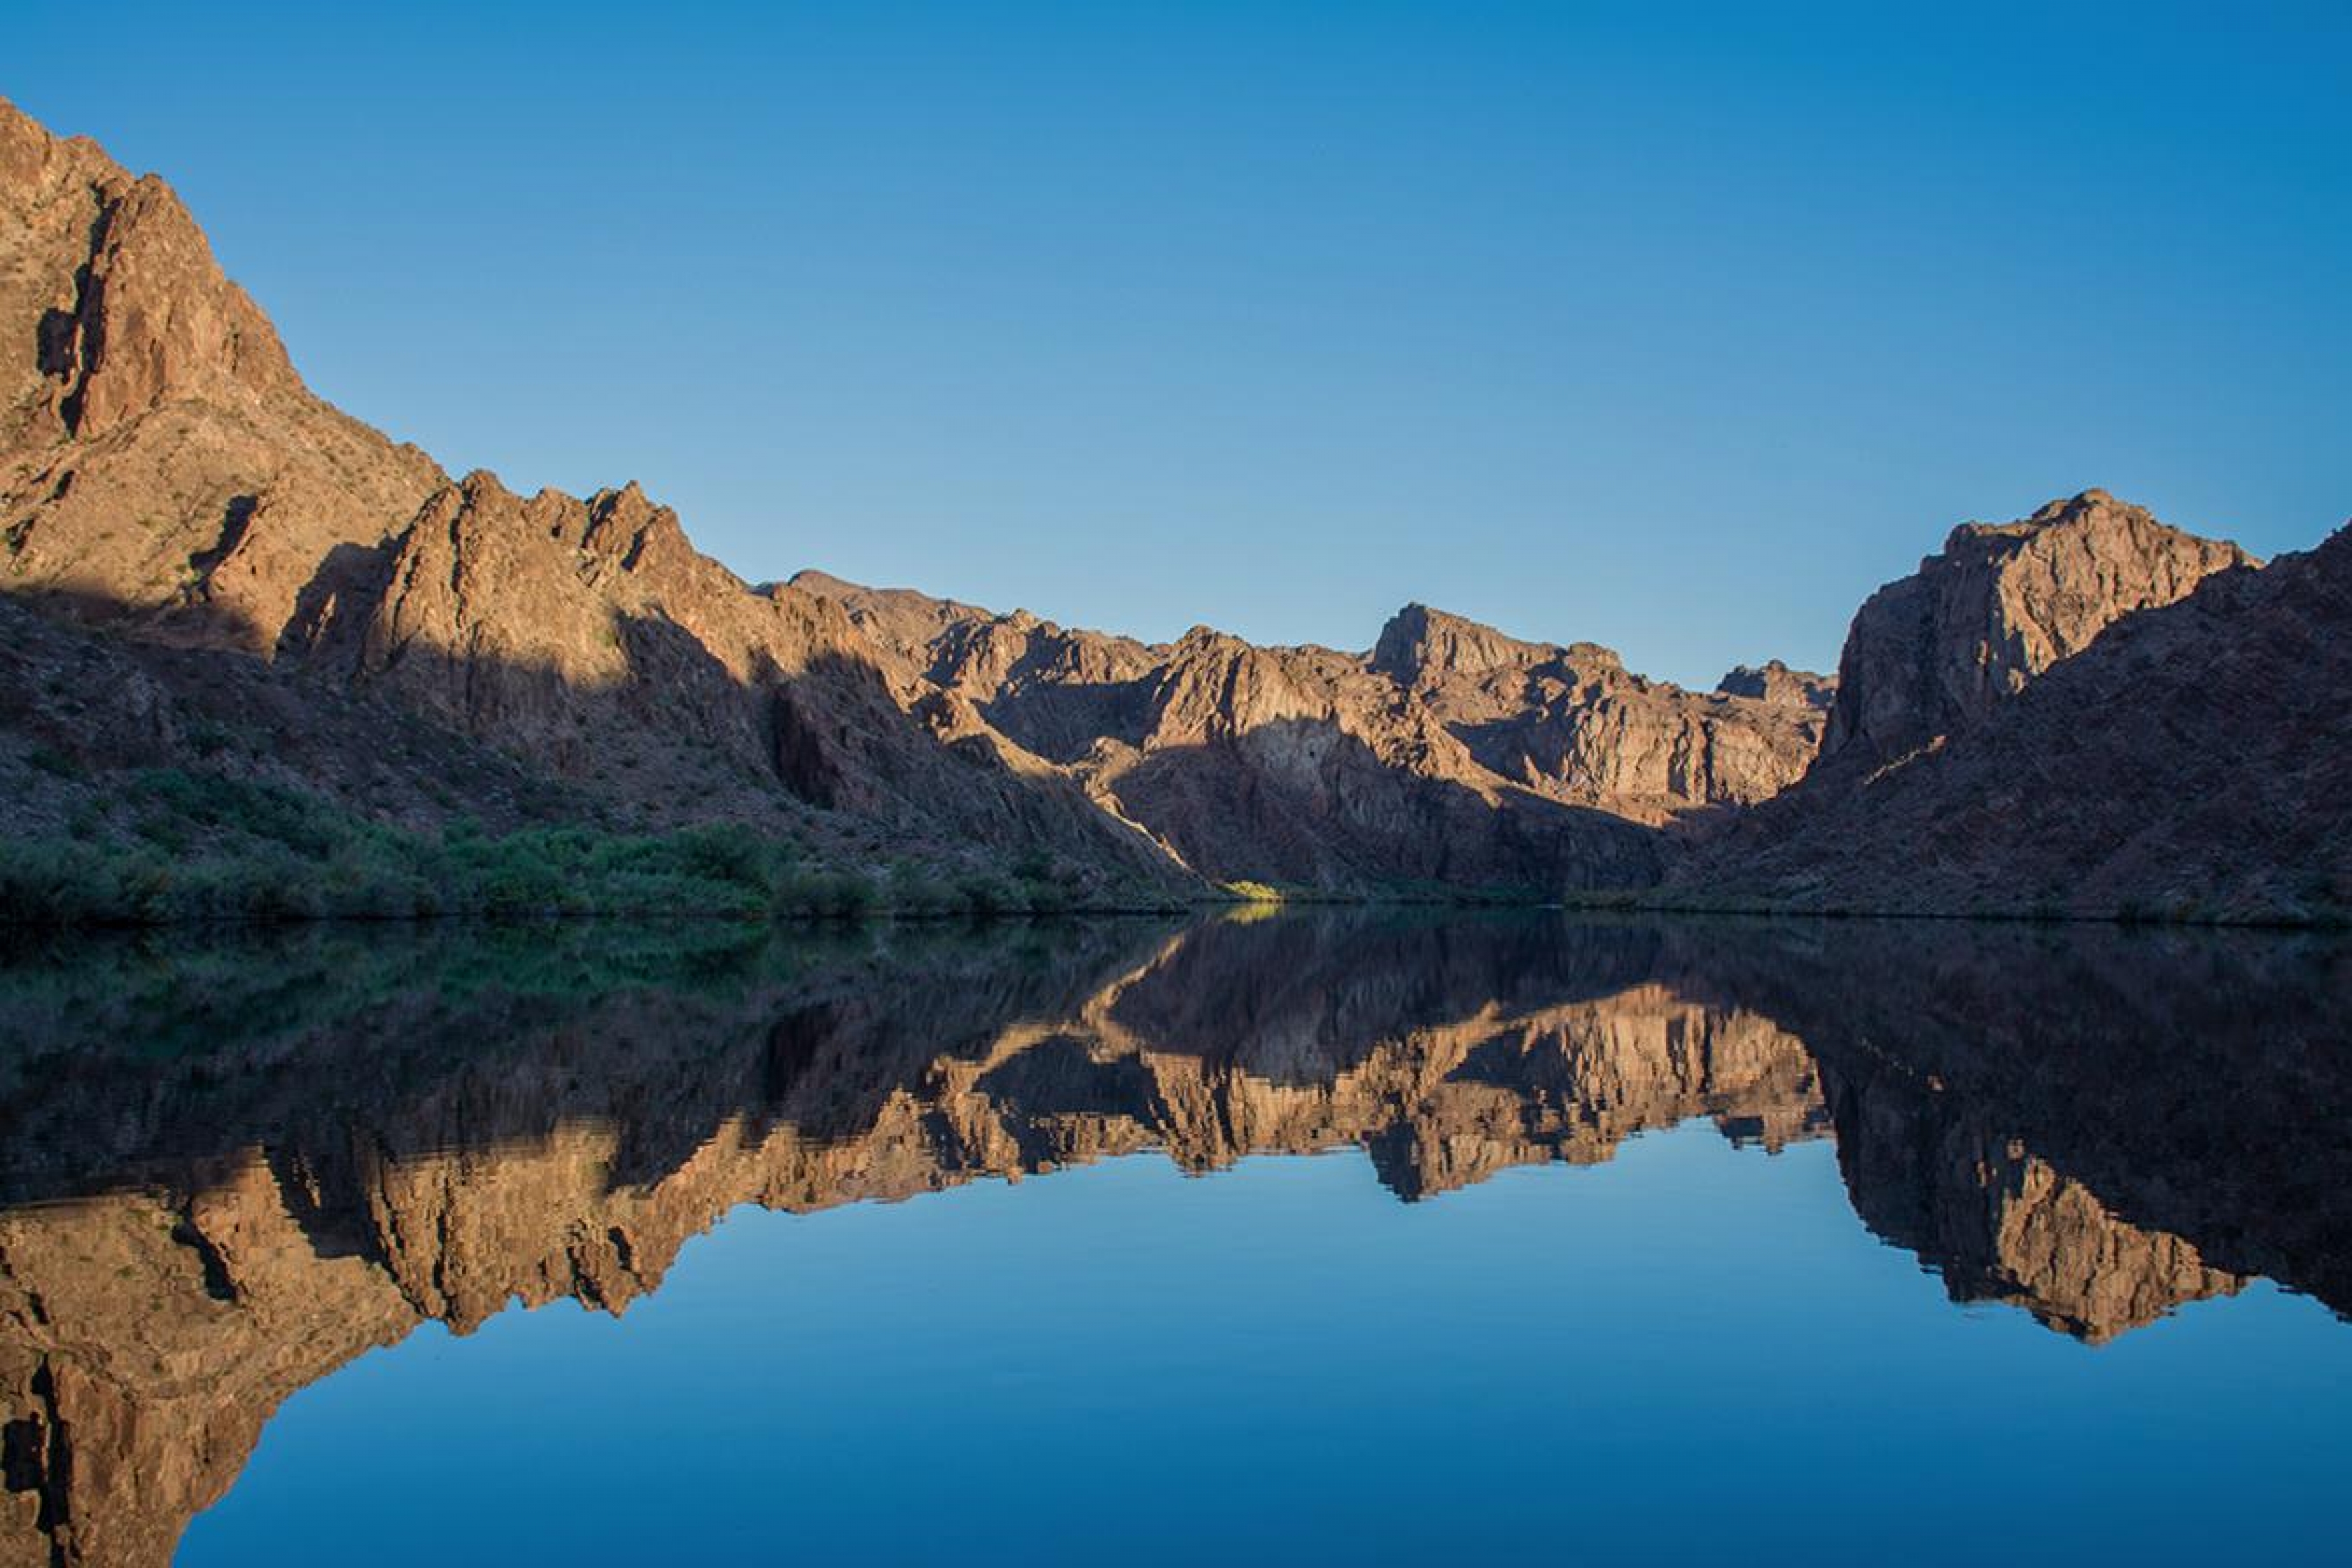 The red sandstone canyon walls reflecting in the still waters of the Black Canyon Water Trail at Lake Mead National Recreation Area